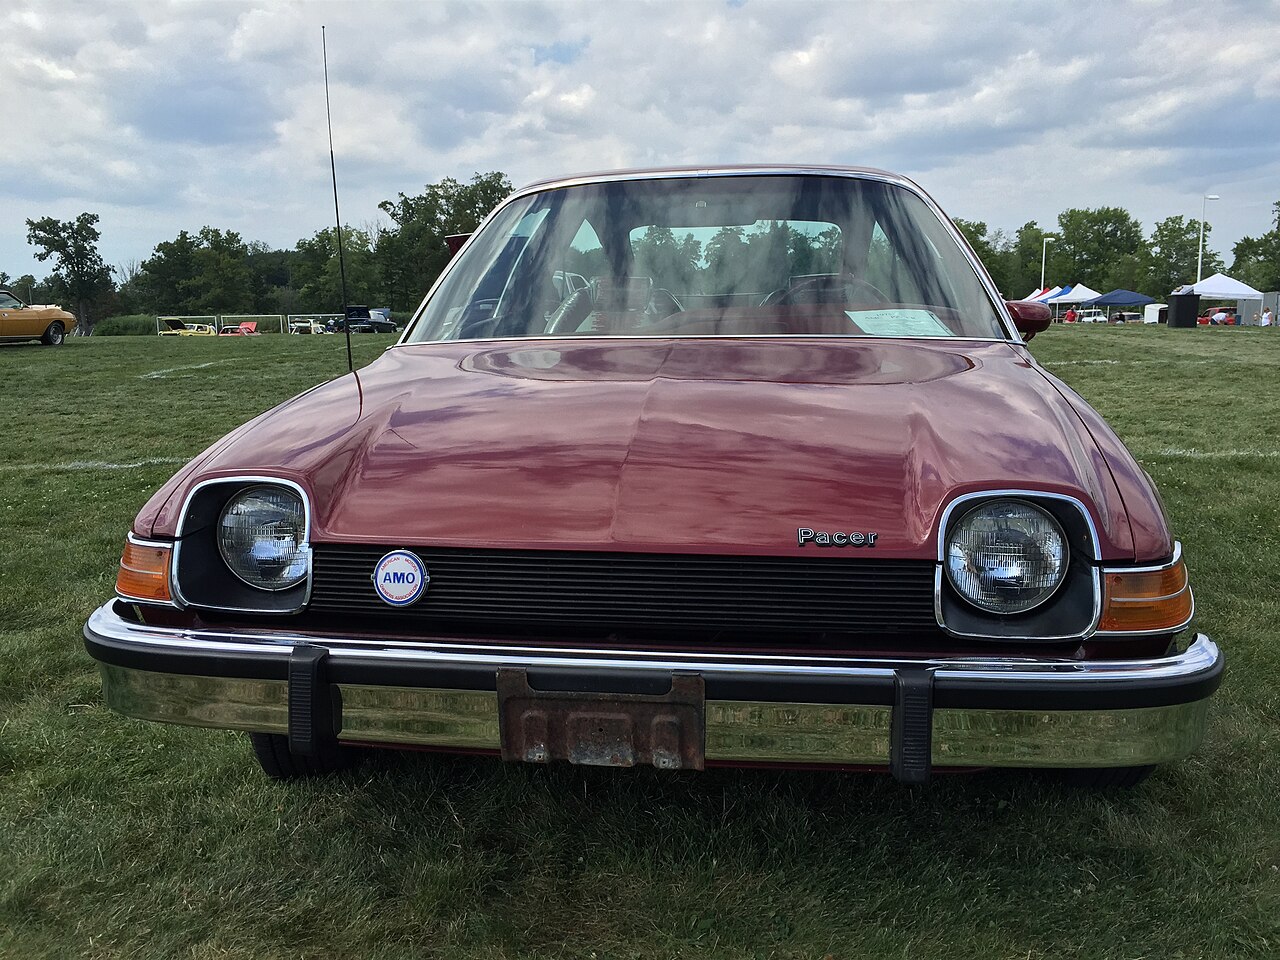 Image of 1975 AMC Pacer DL coupe in Autumn Red at 2015 AMO show 06of12